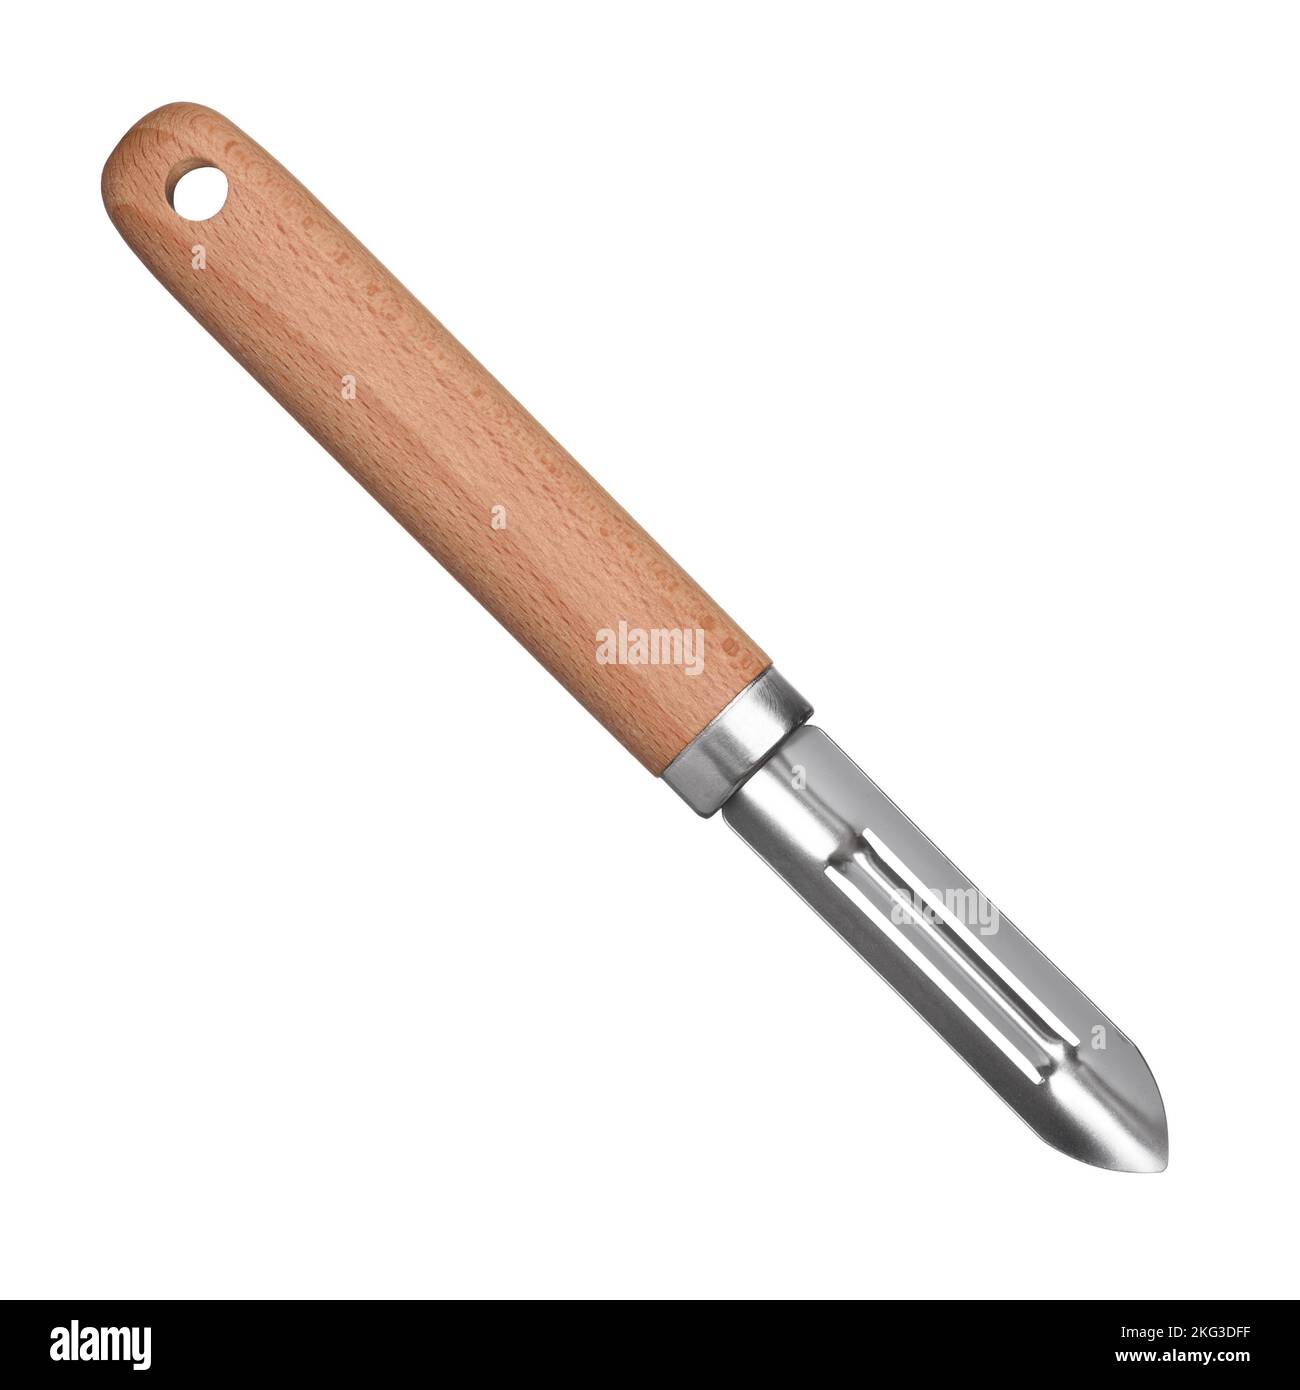 https://c8.alamy.com/comp/2KG3DFF/vegetable-peeler-isolated-on-white-background-new-clean-potato-peeler-with-wooden-handle-2KG3DFF.jpg